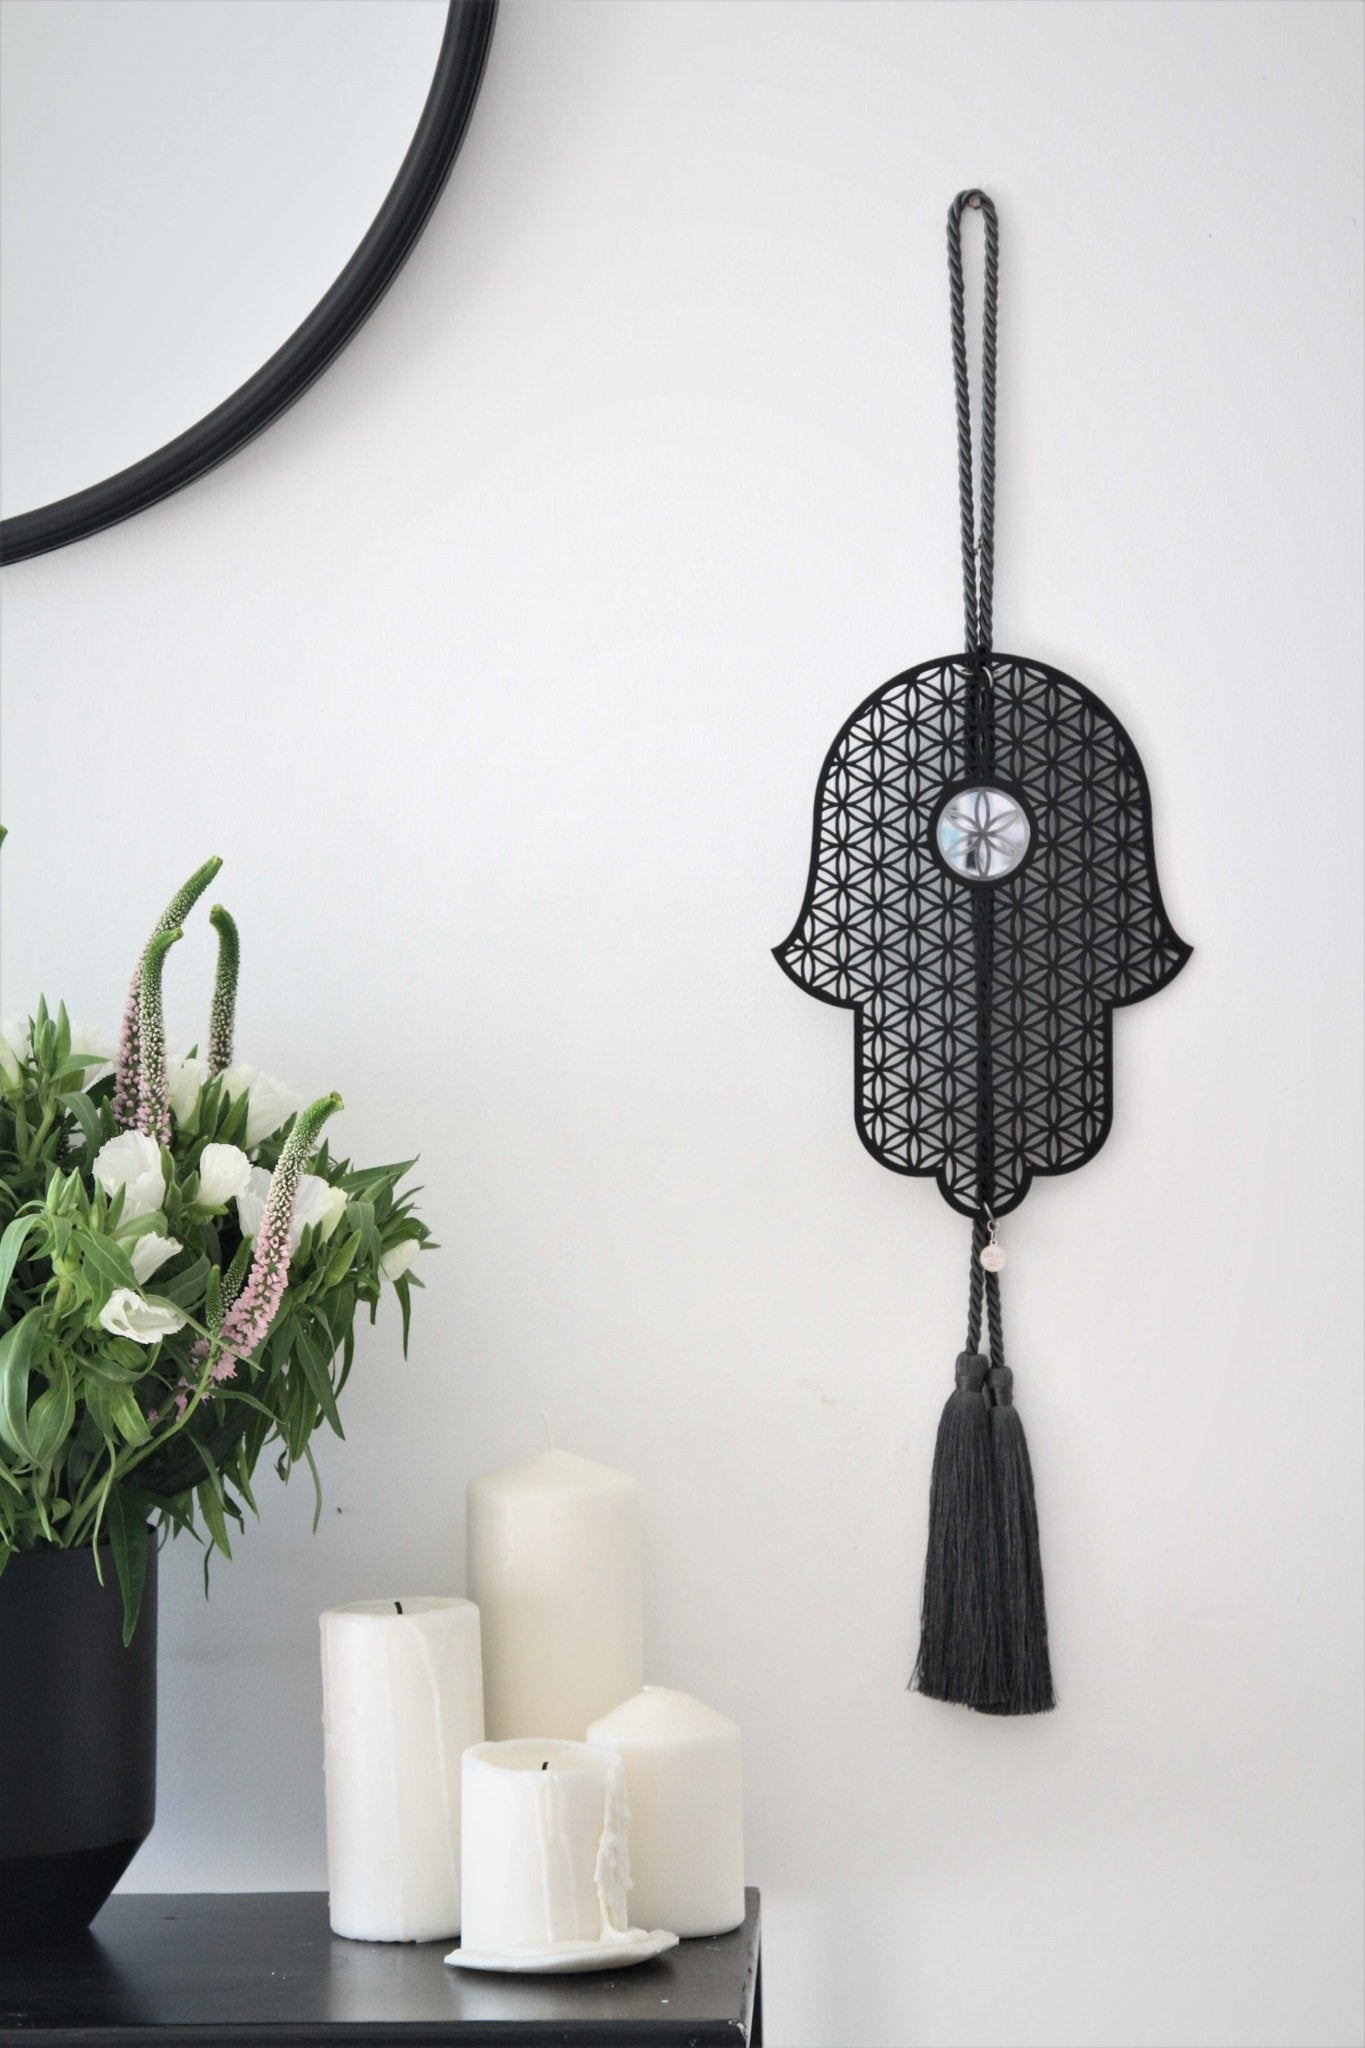 Large Home Blessing Hamsa Wall hanging - black acrylic Hand of fatima with the flower of life element - stylish luck home decore